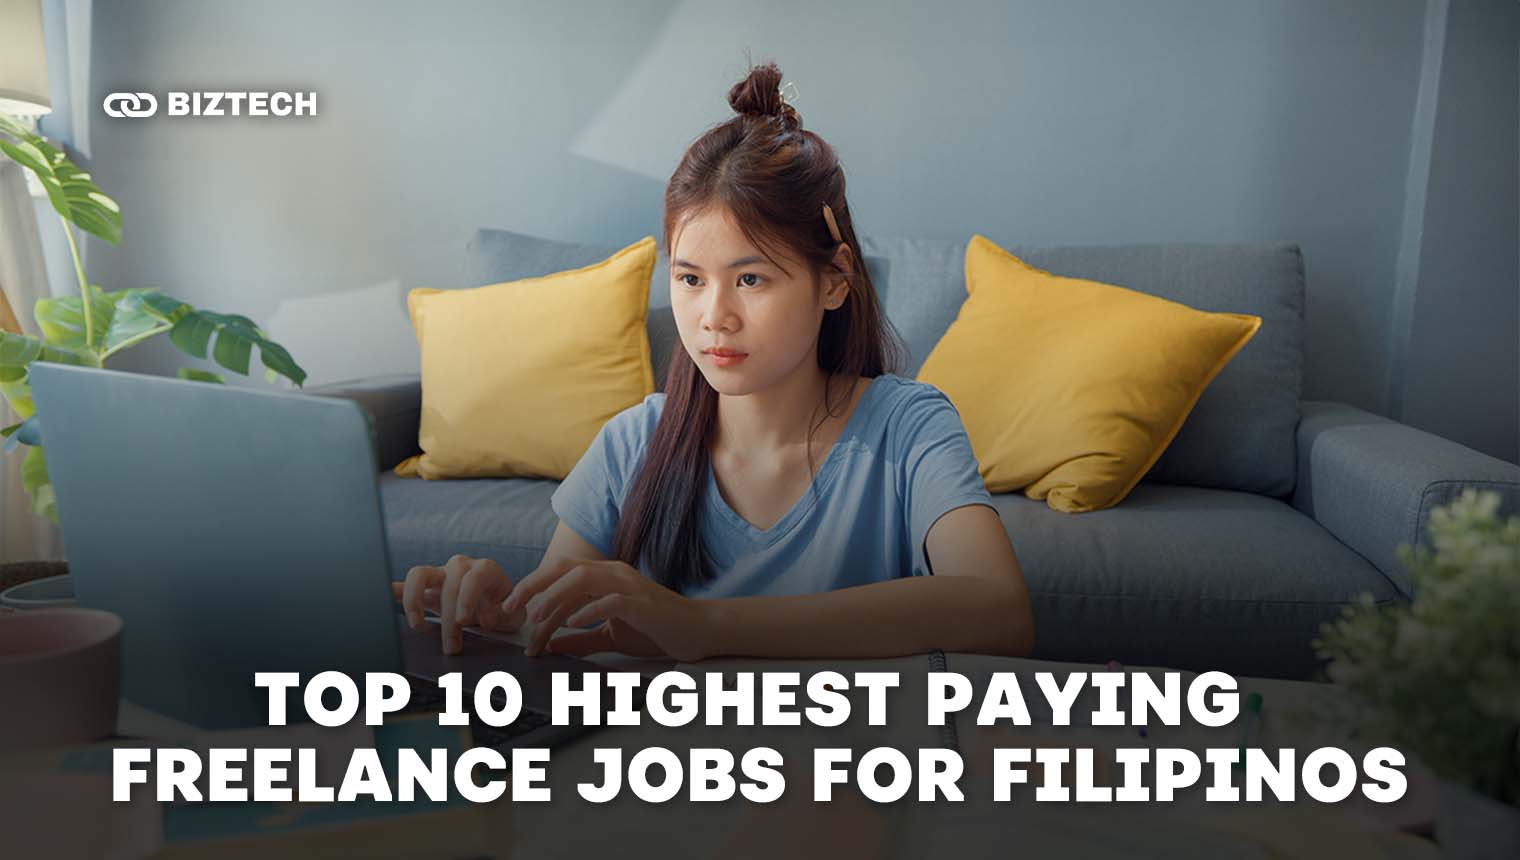 Top 10 Highest Paying Freelance Jobs for Filipinos (Easy)